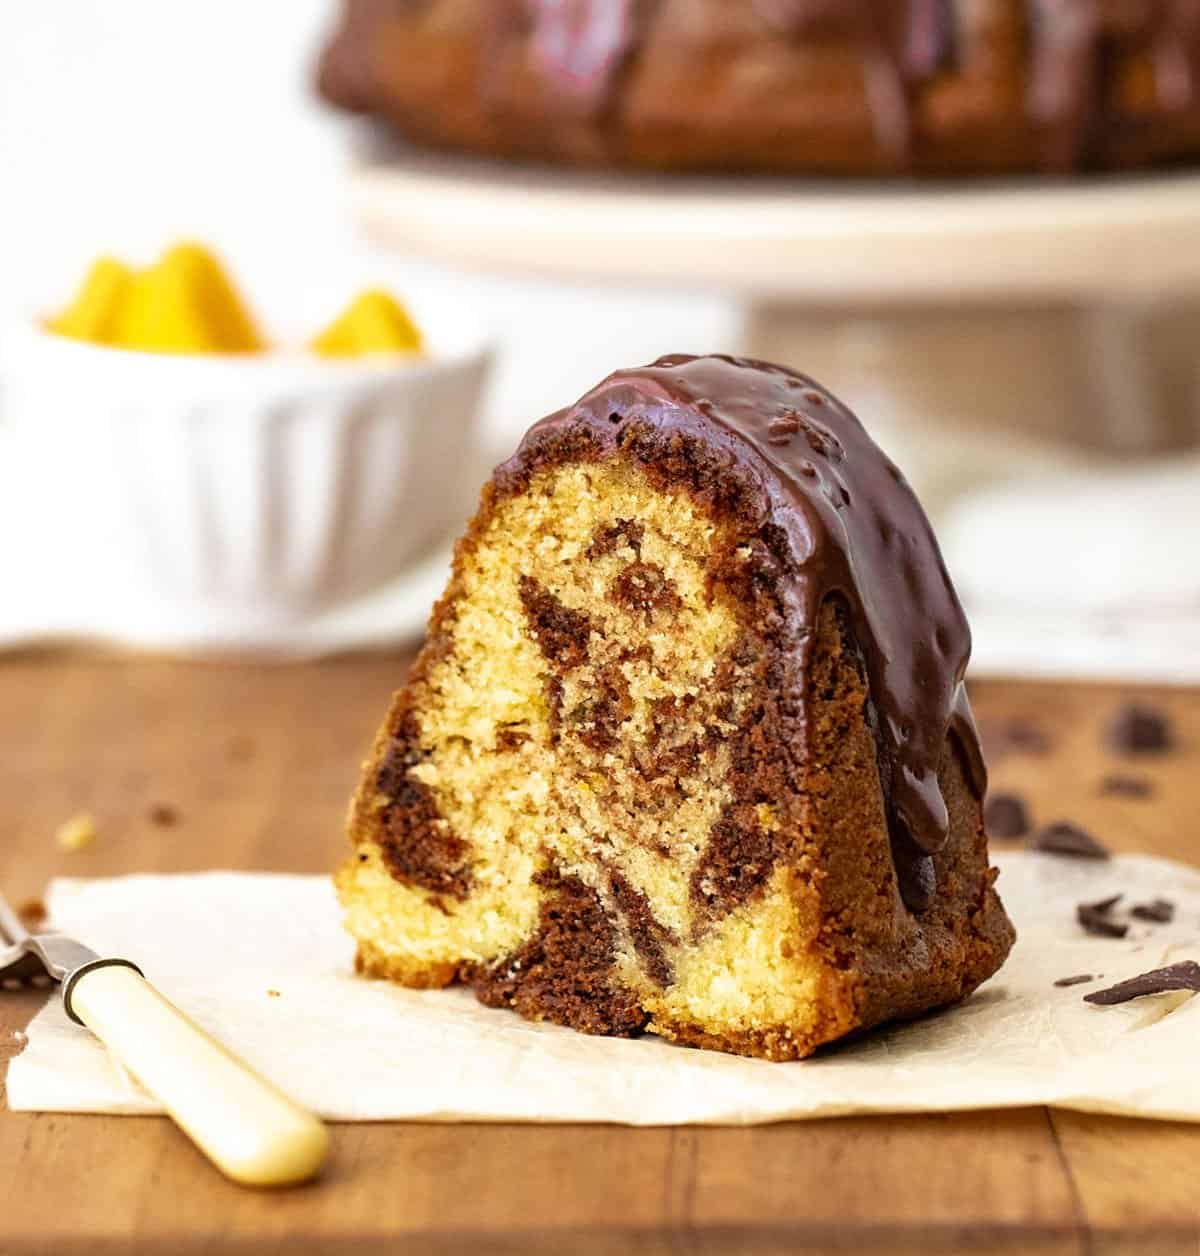 Single slice of marble chocolate orange bundt cake on white paper on wooden table, a fork, white bowl and cake stand in background.